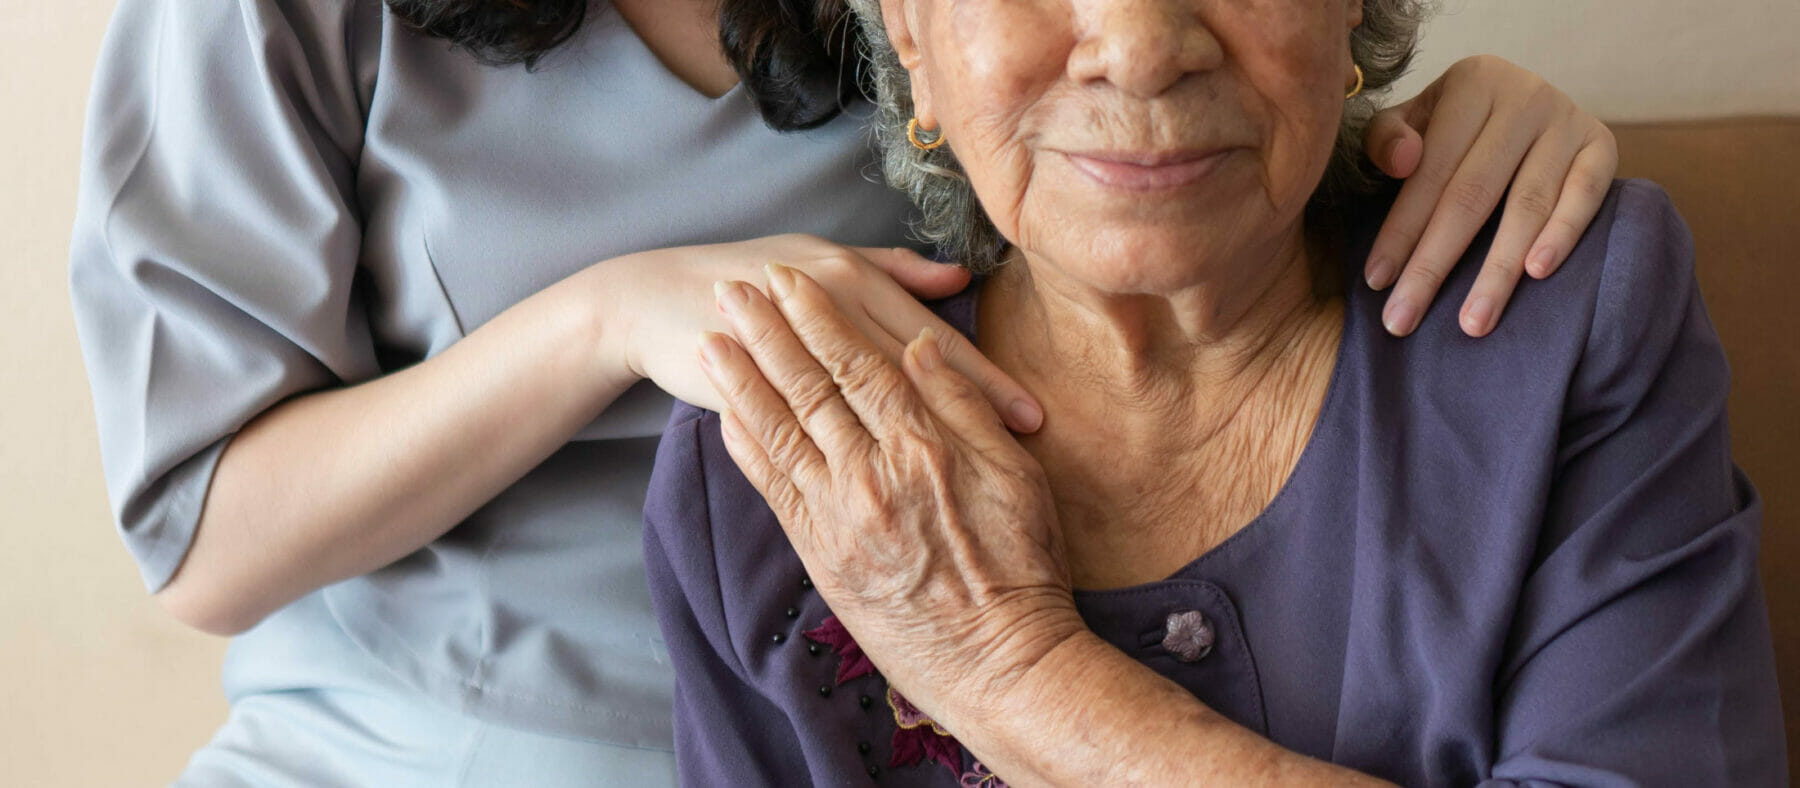 What is palliative care?